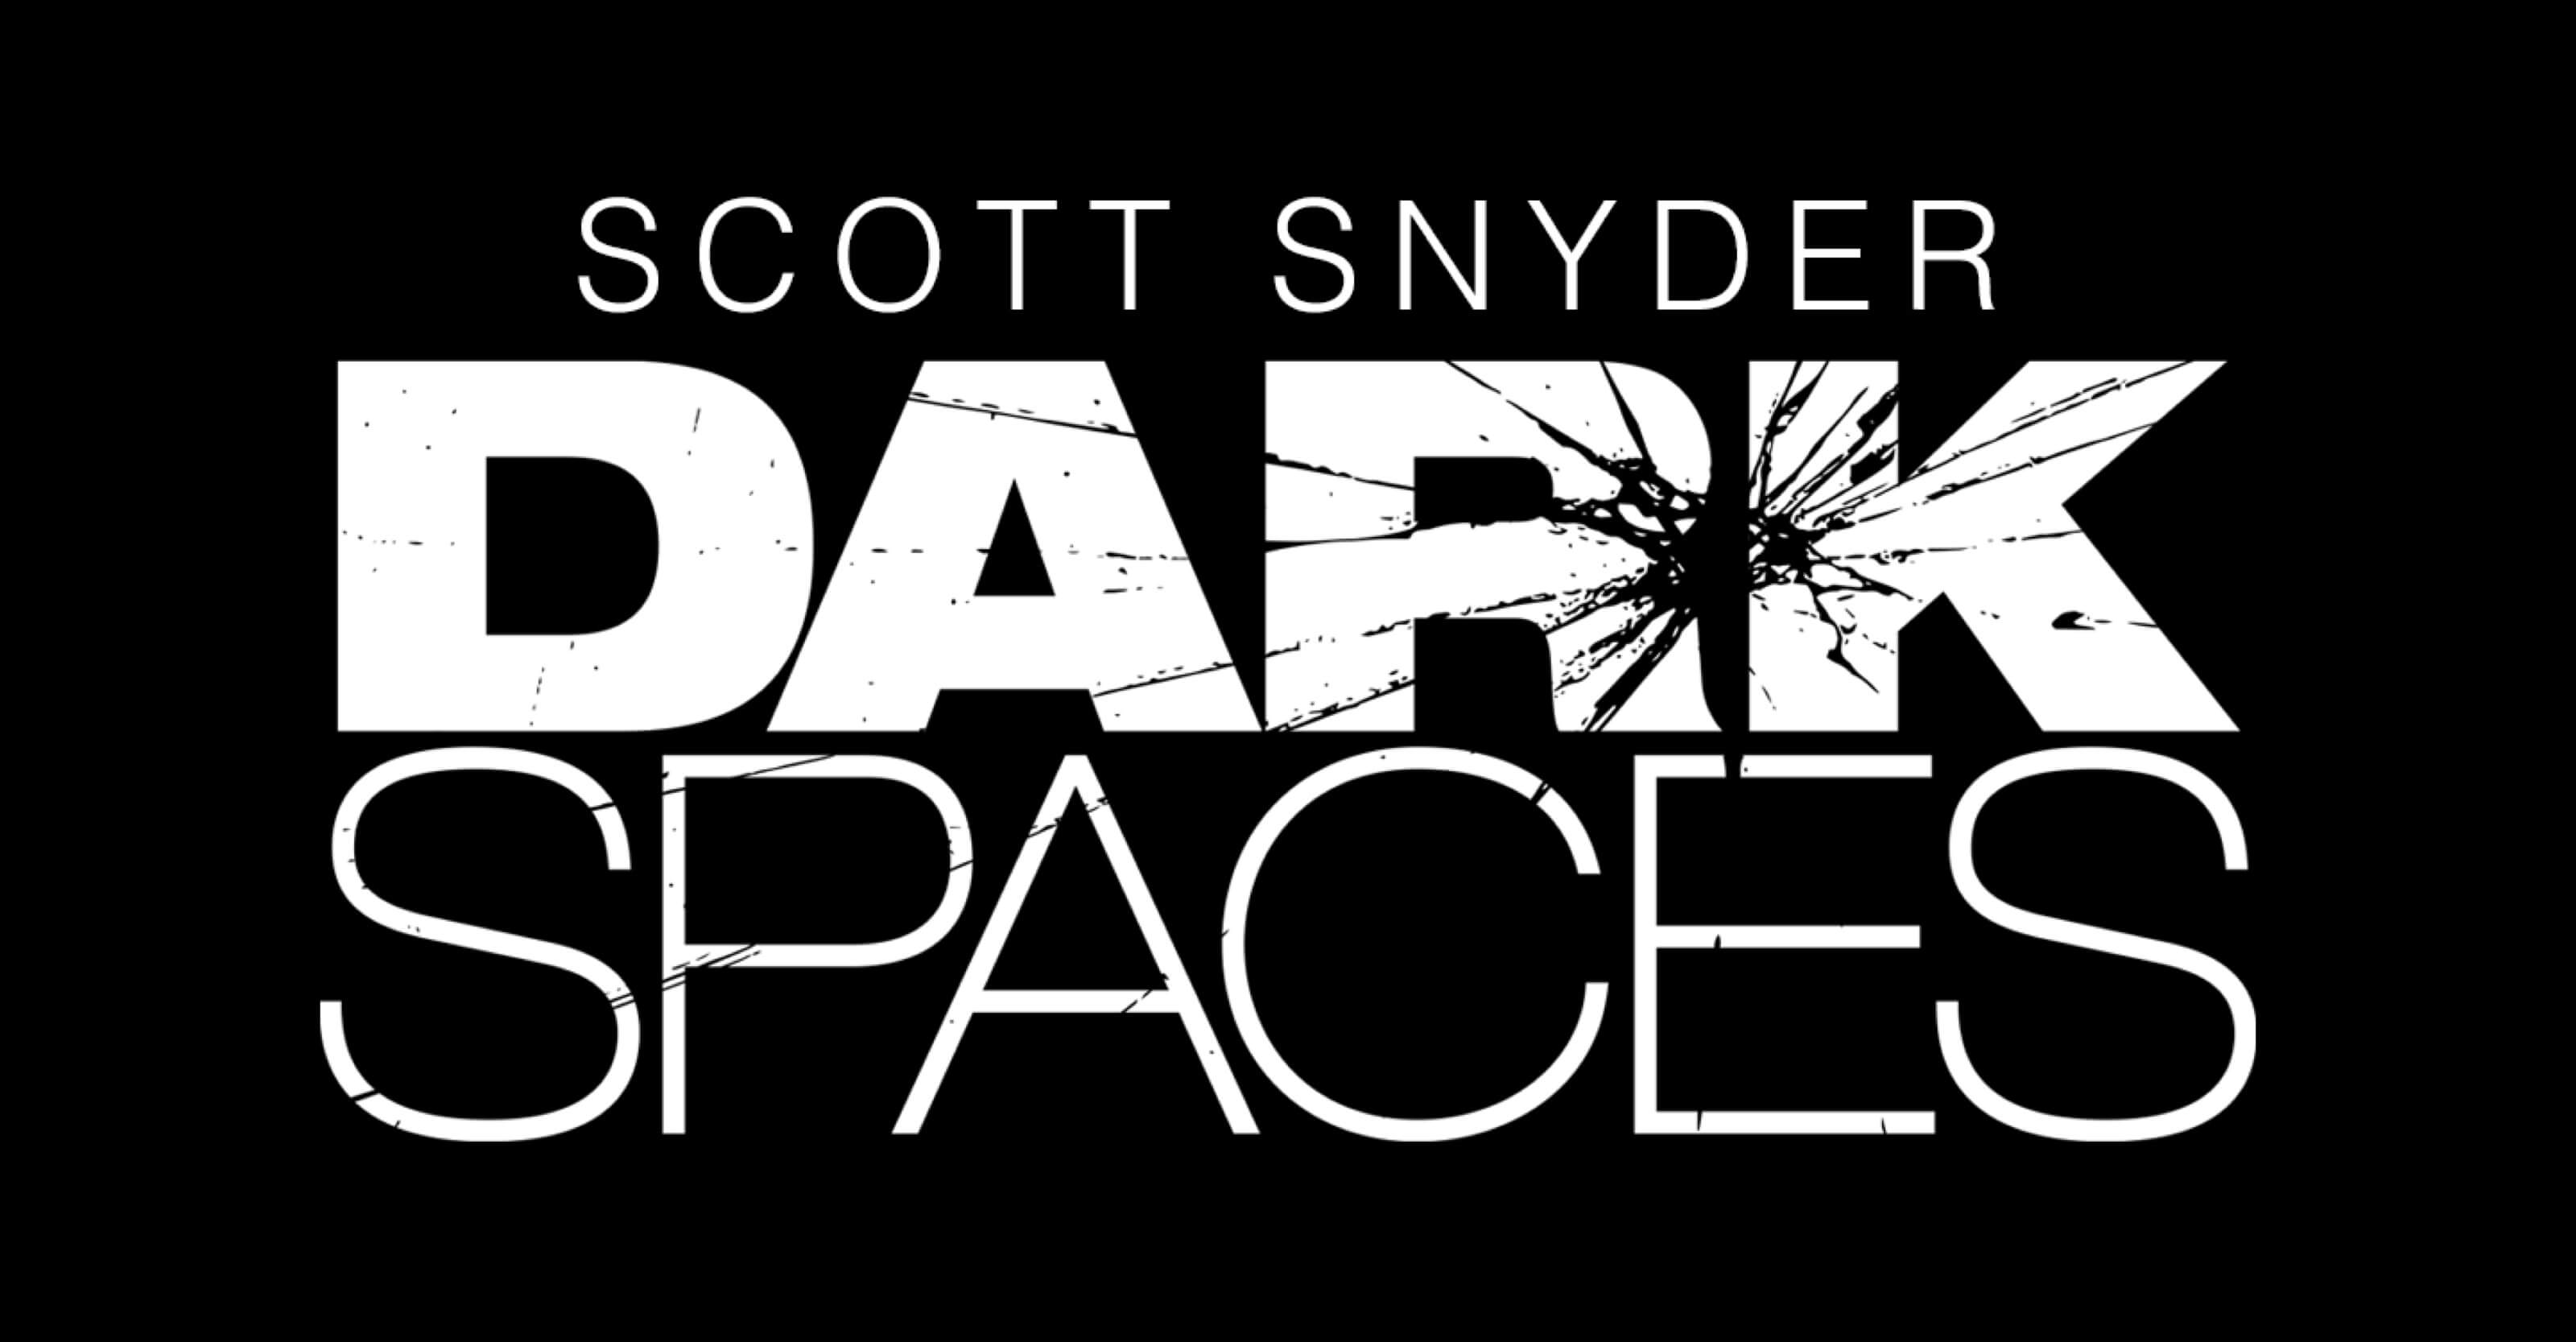 New York Times Best-selling Author Scott Snyder Launches Dark Spaces Anthology Series at IDW